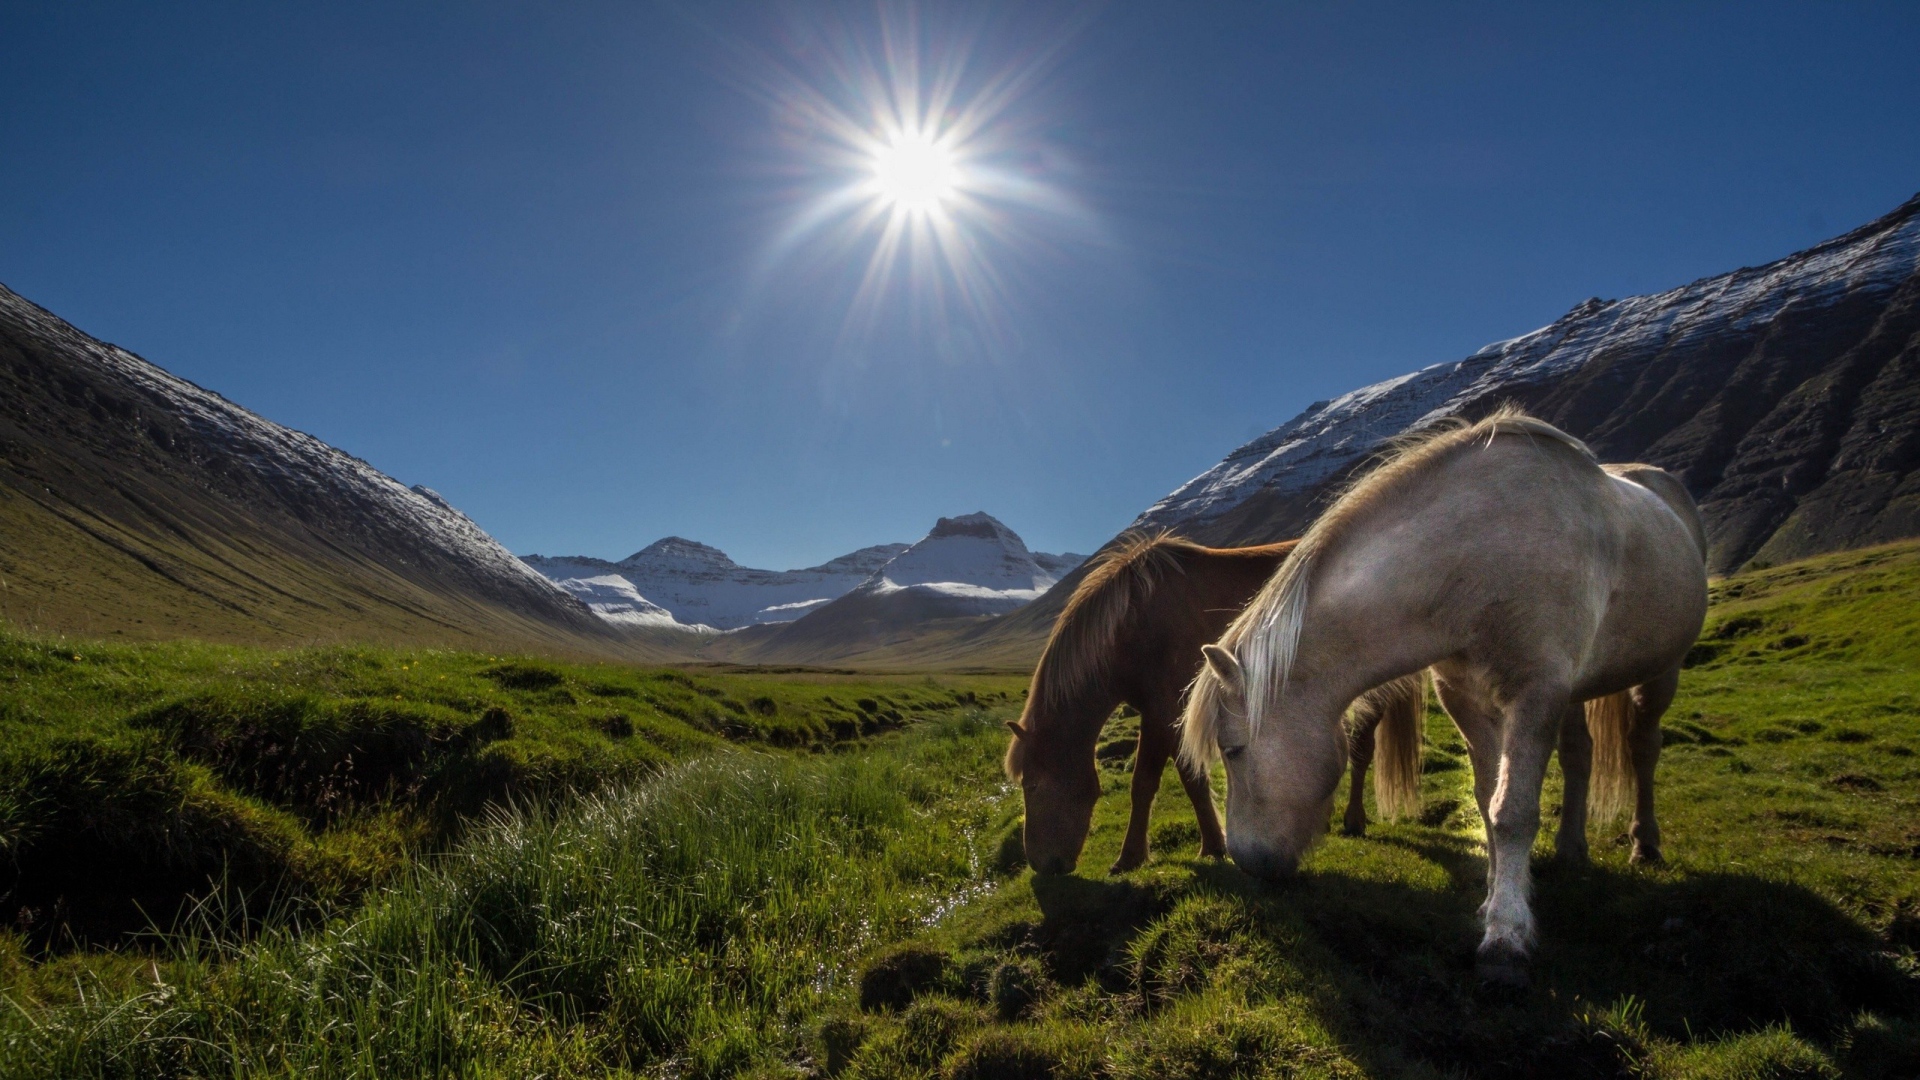 Horses on a mountain pasture